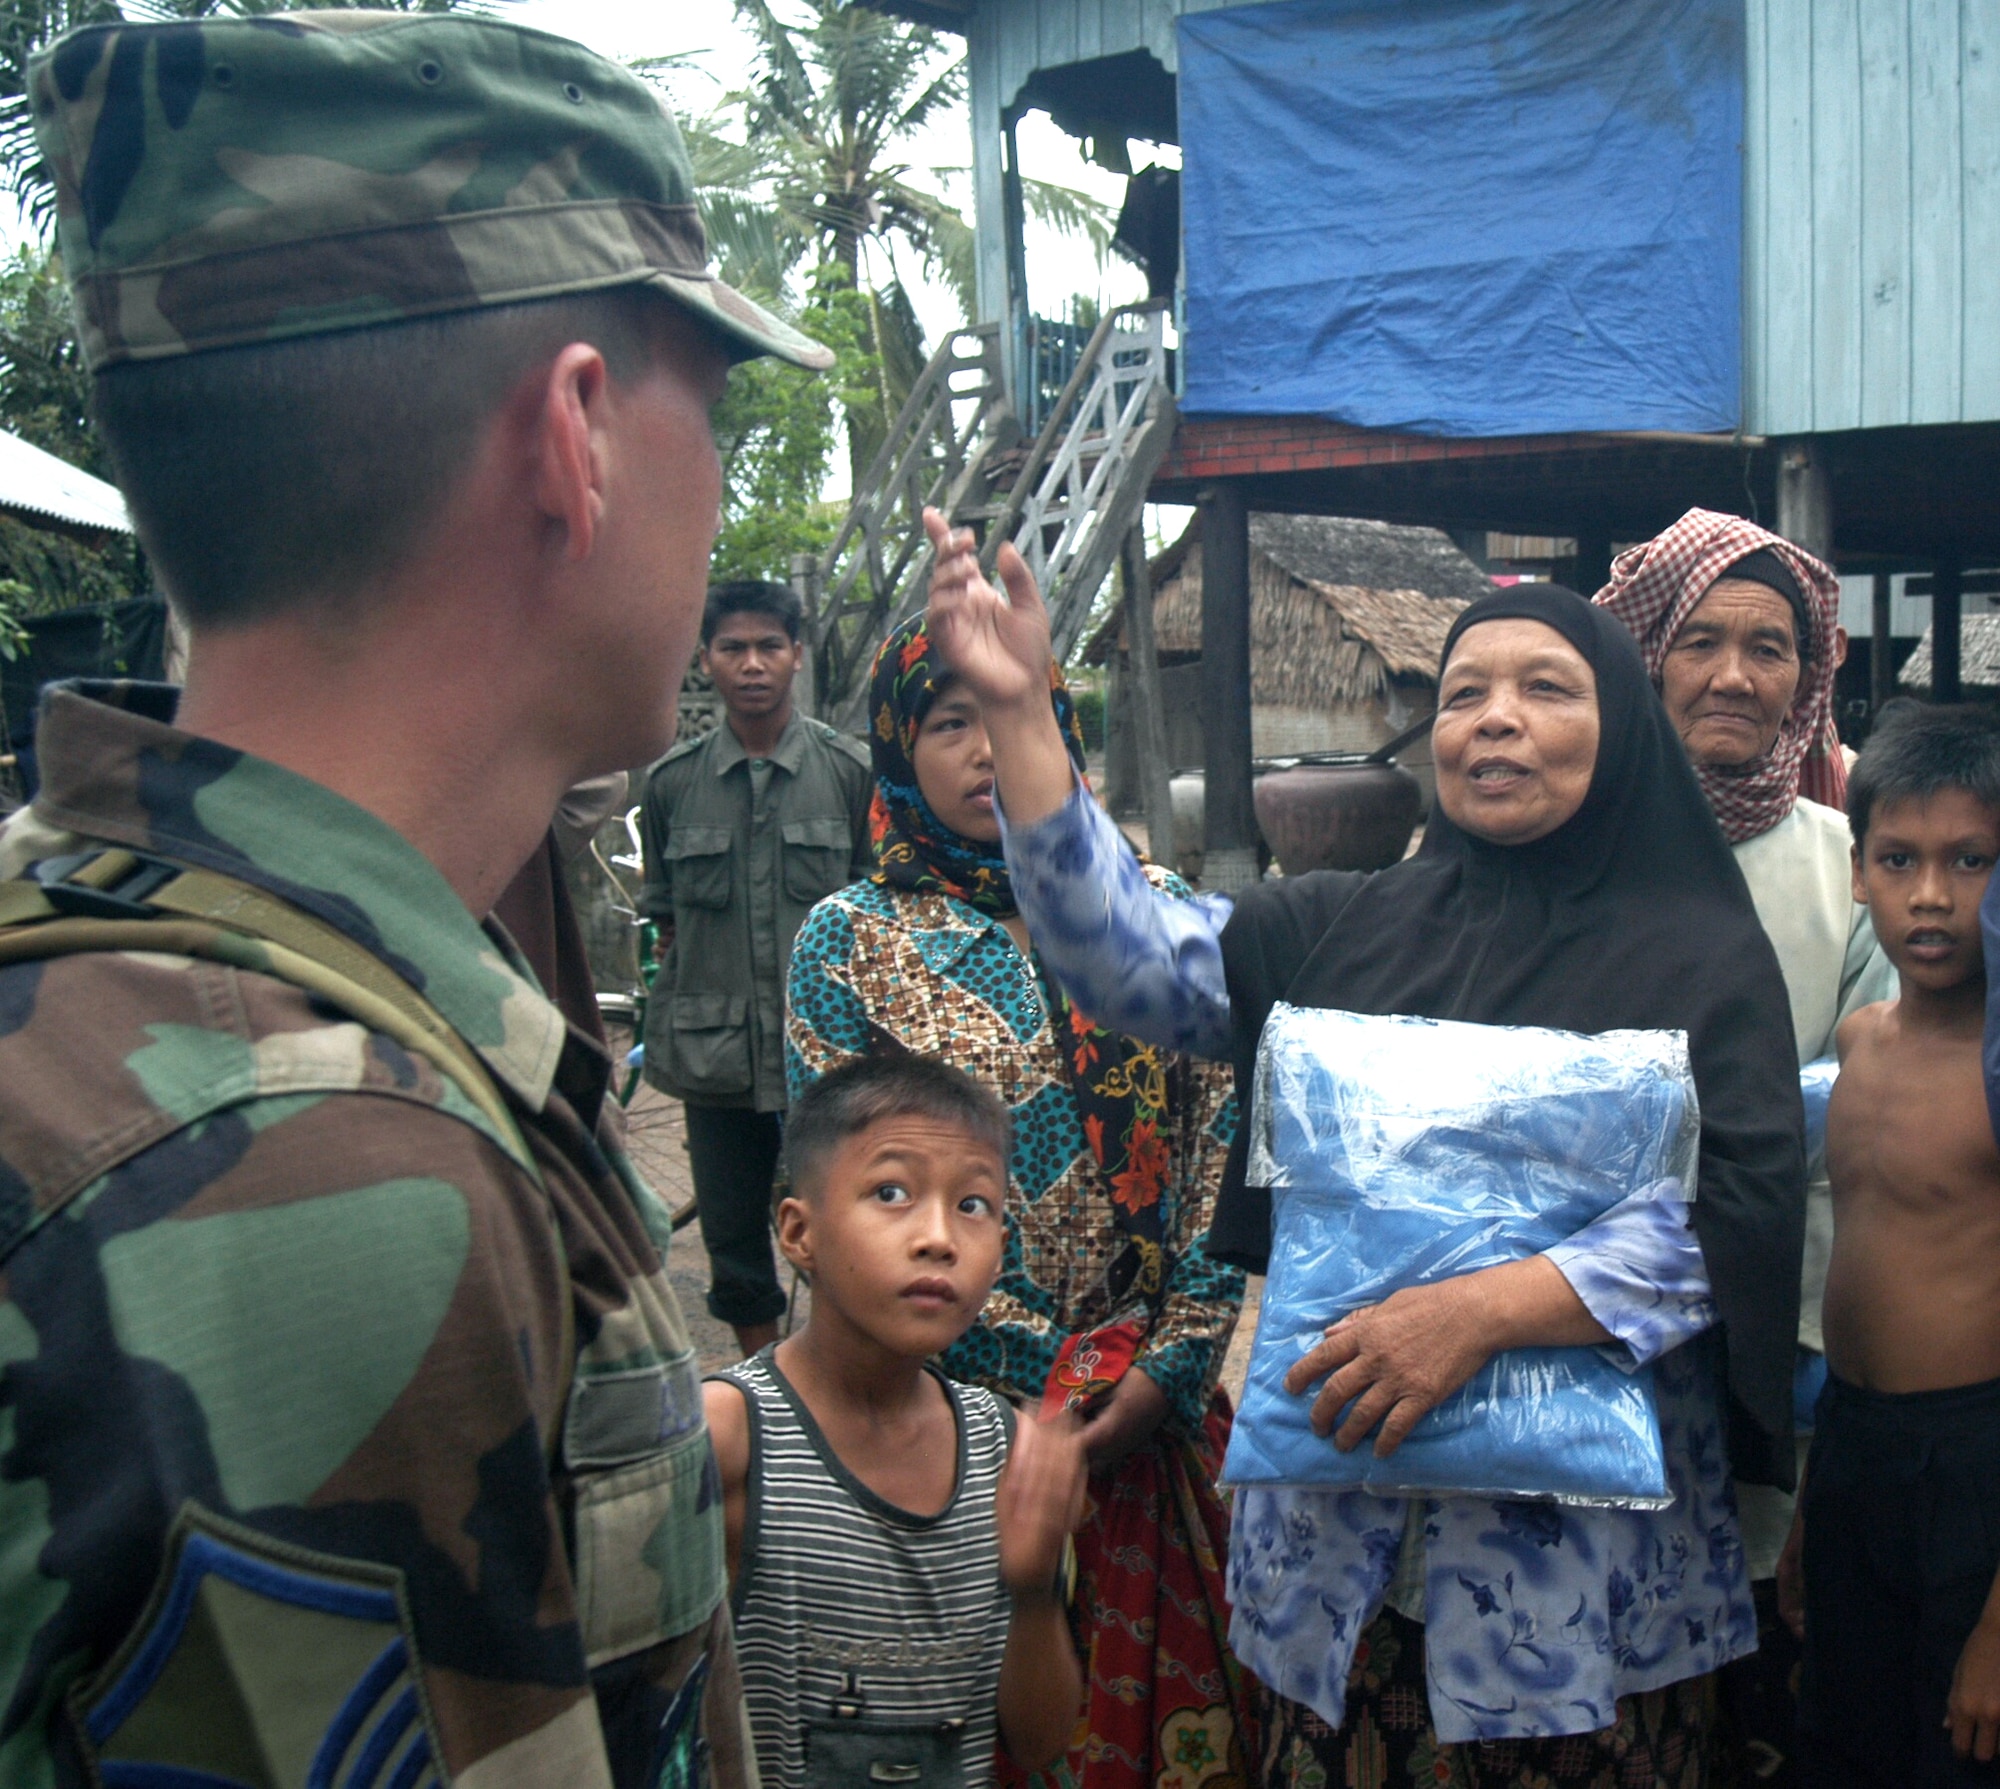 KEP, Cambodia -- Master Sgt. Dan Elliott talks with a Cham-Muslim woman in a village near here May 17 after handing out mosquito nets.  Sergeant Elliott is the noncommissioned officer in charge of a 20-person blast resuscitation and victim assistance team on a two-week humanitarian mission.  Sergeant Elliott is assigned to Detachment 2 of the 13th Air Force international health specialist program at Hickam Air Force Base, Hawaii. (U.S. Air Force photo by Master Sgt. Adam Johnston)